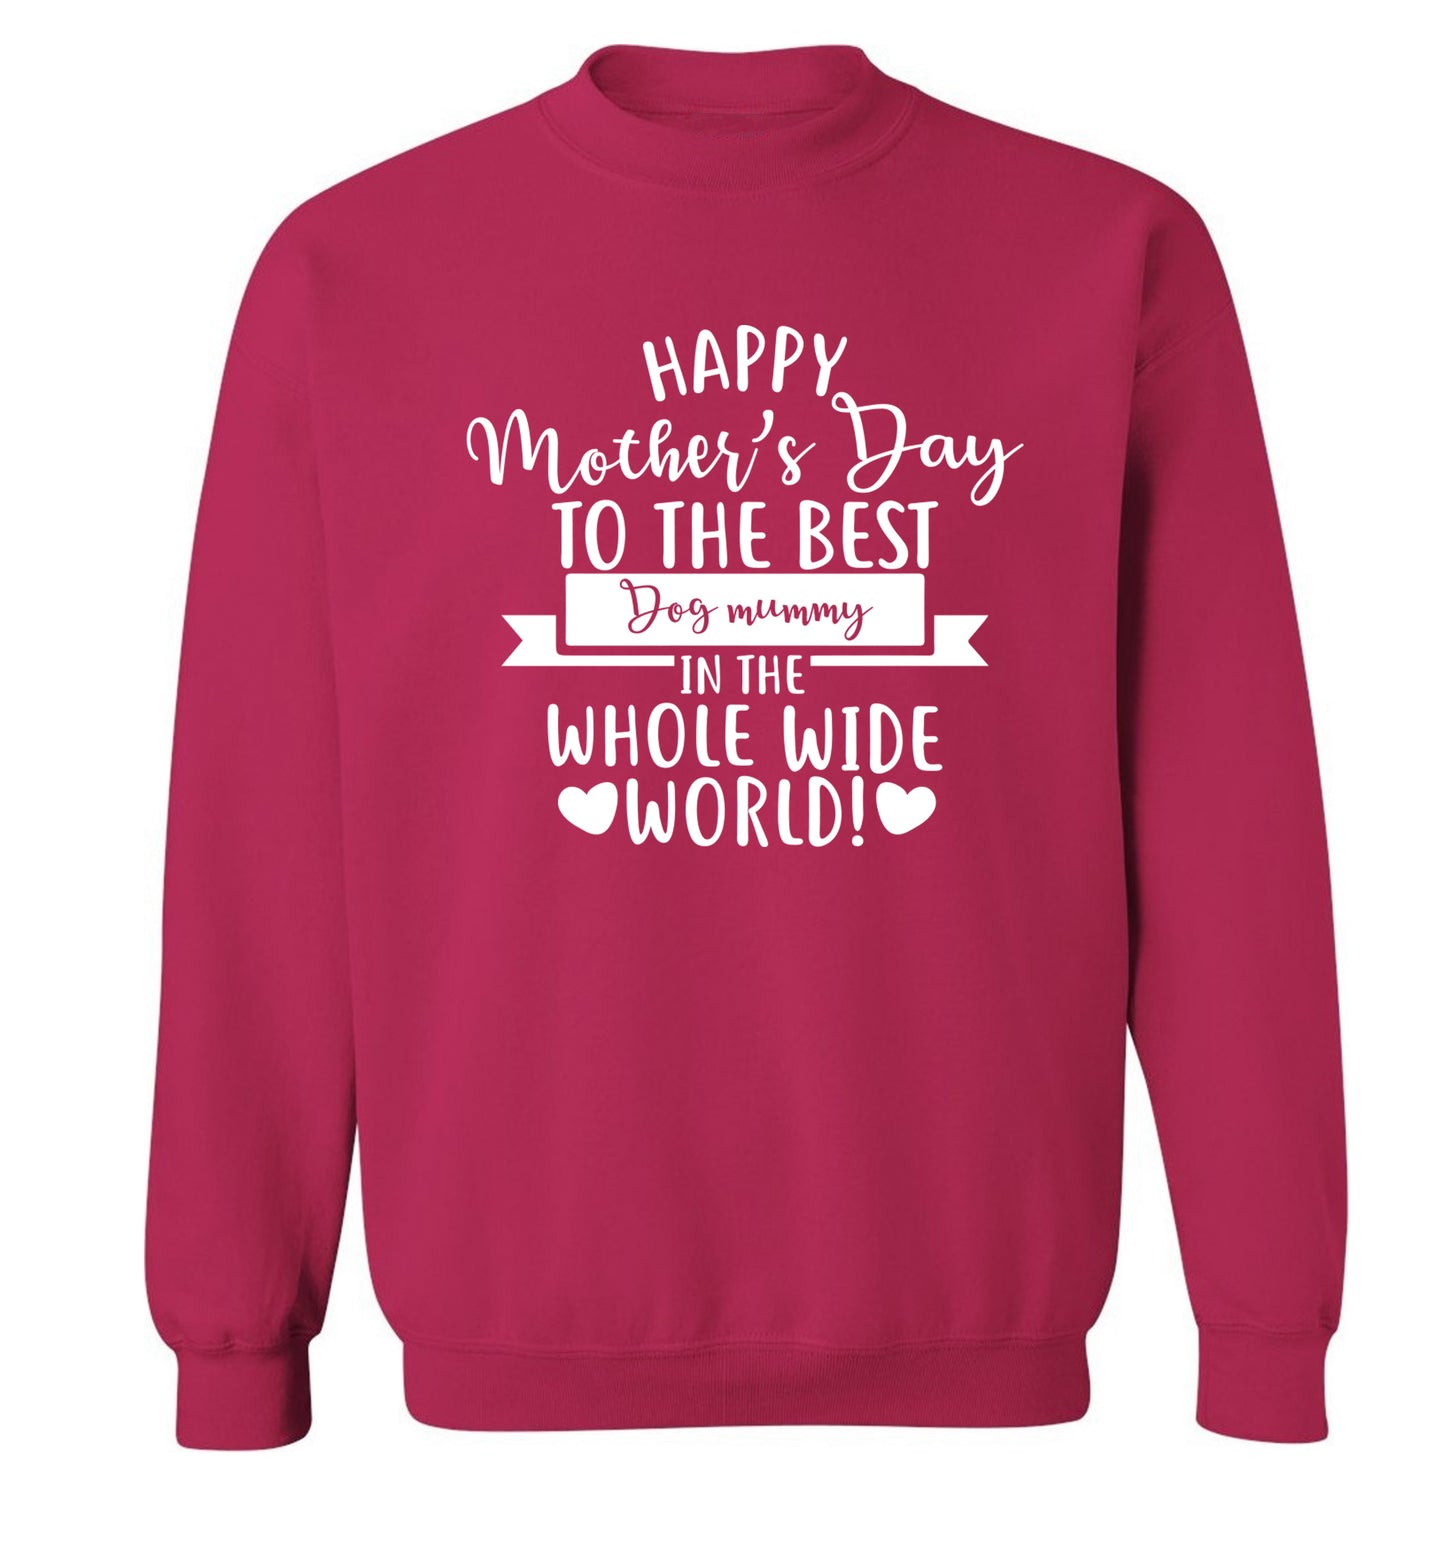 Happy mother's day to the best dog mummy in the world Adult's unisex pink Sweater 2XL